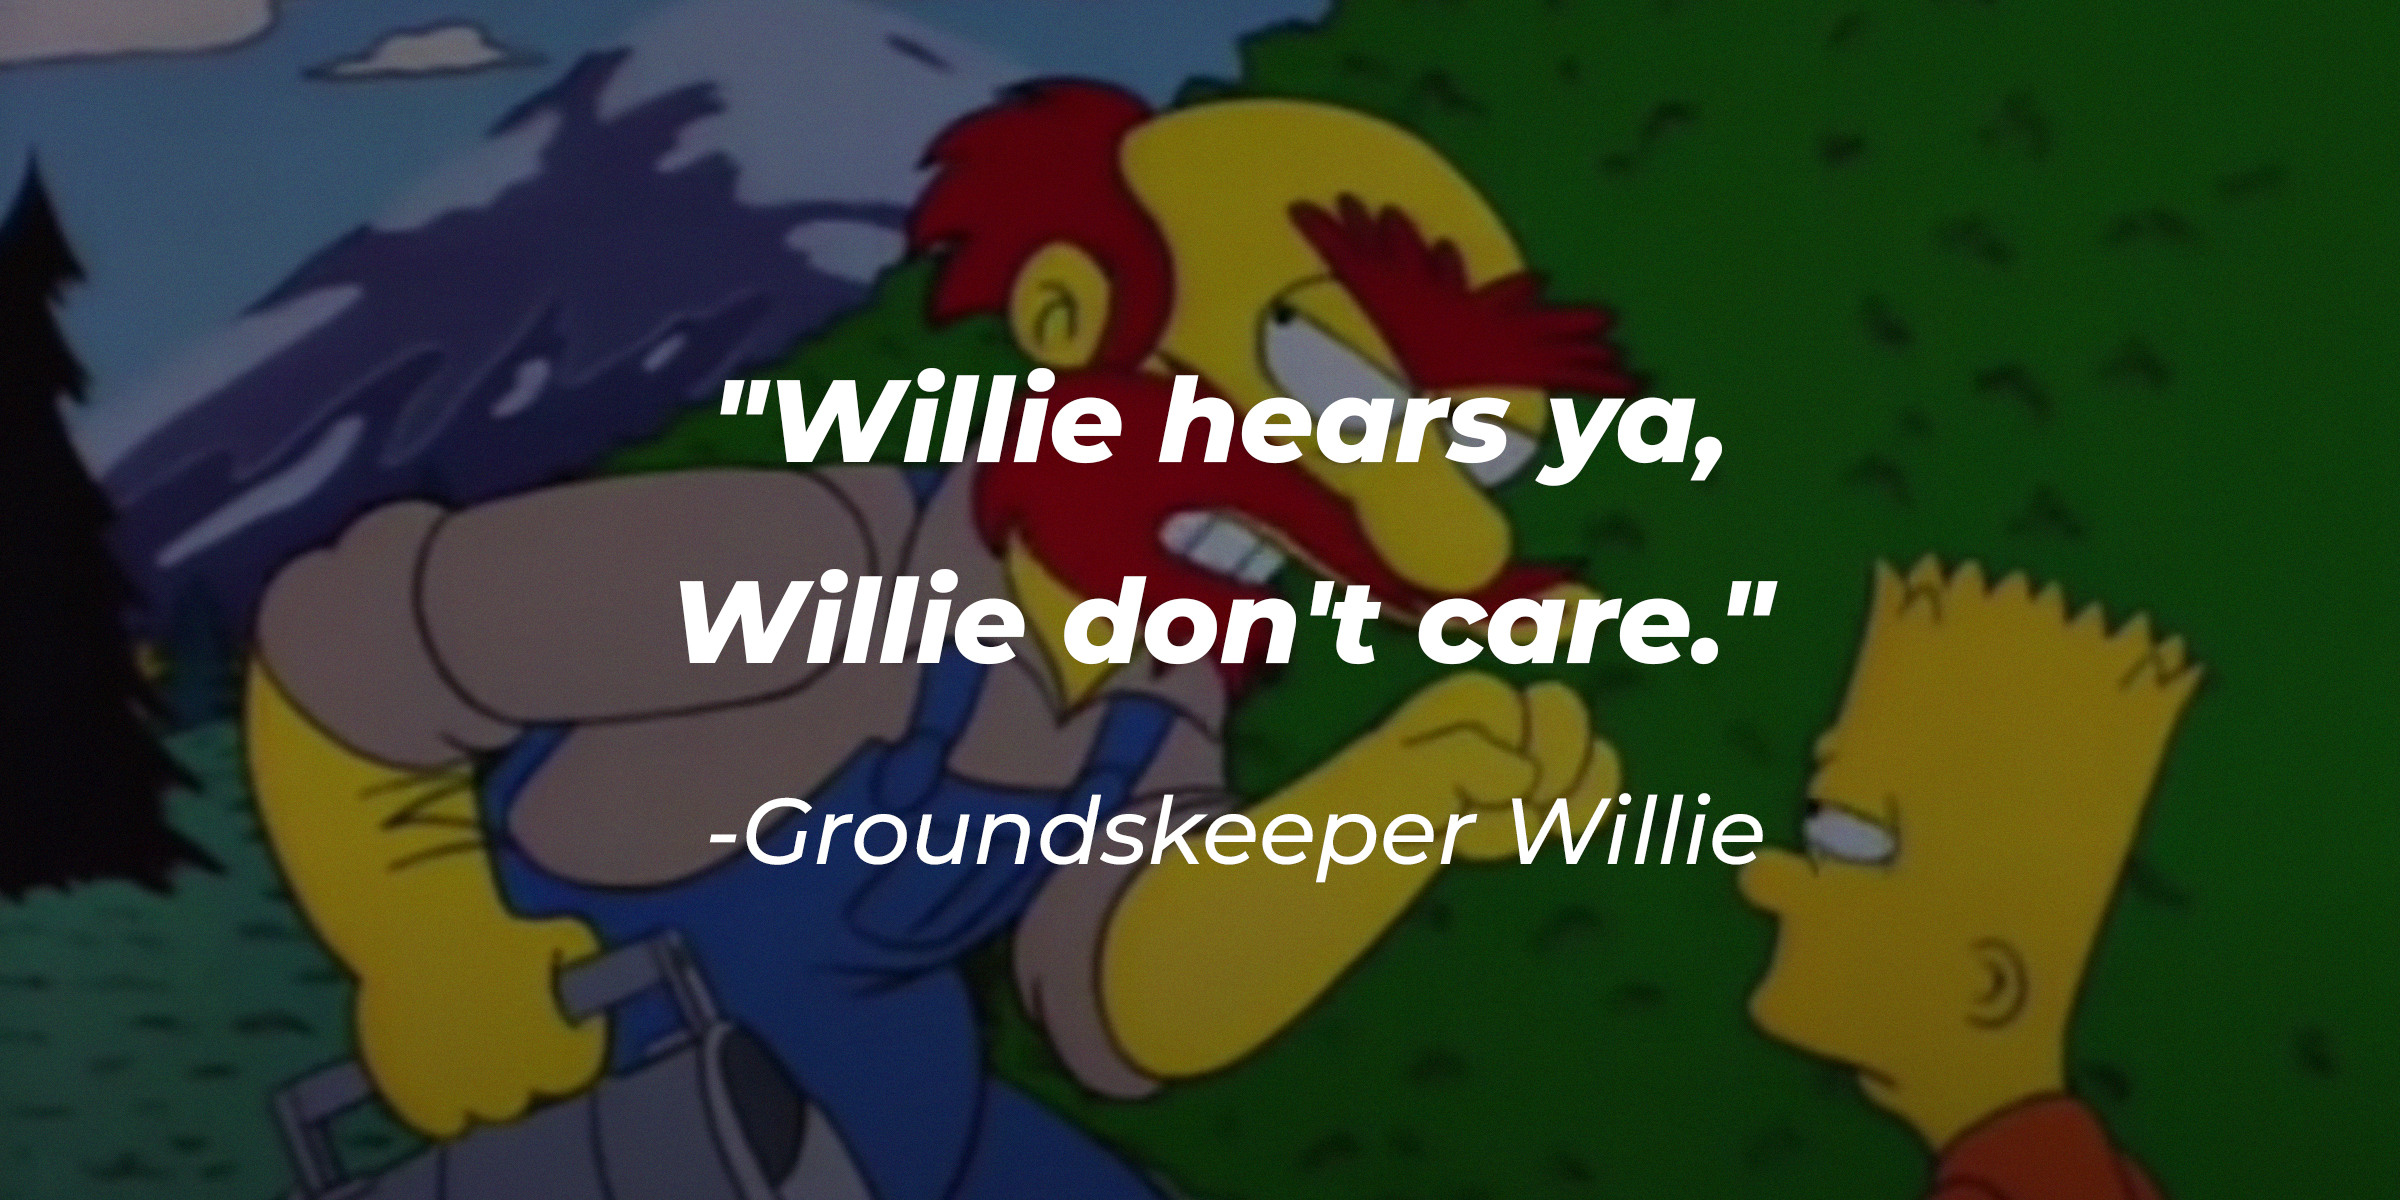 A photo of Groundskeeper Willie with the quote: "Willie hears ya, Willie don't care." | Source: facebook.com/TheSimpsons